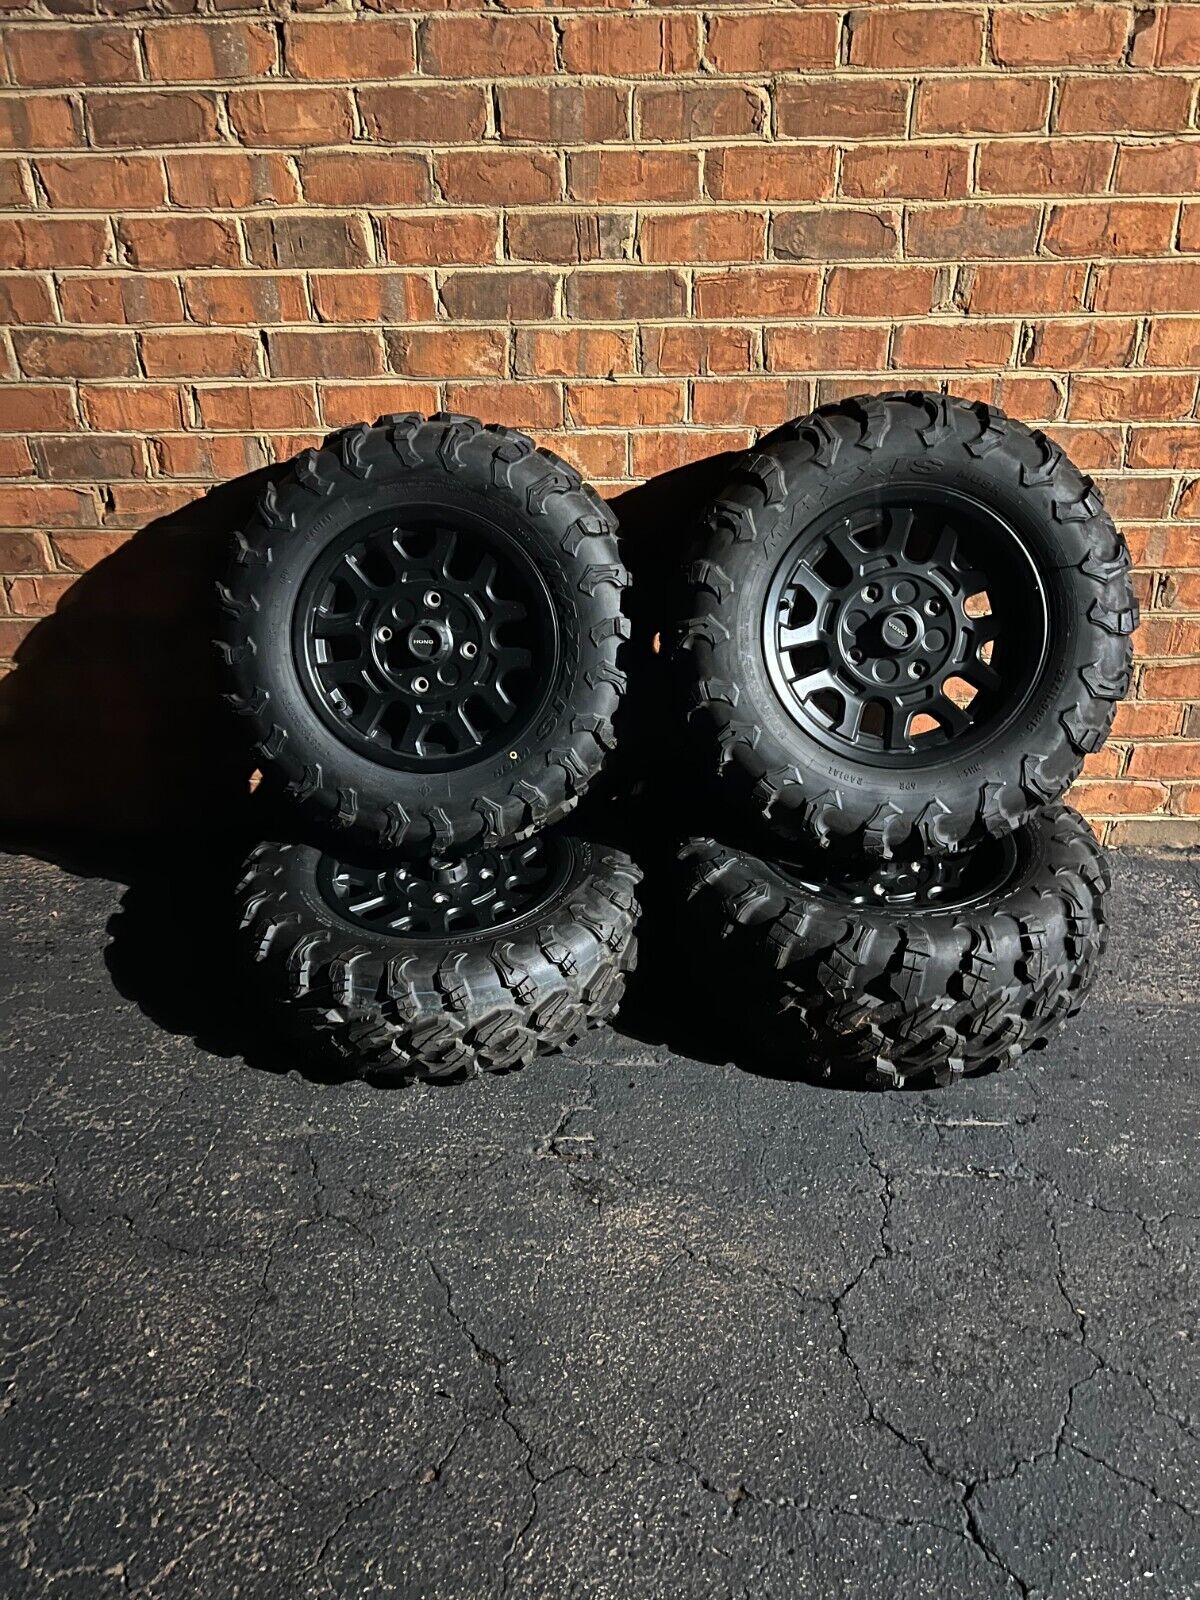 OEM Honda Talon Wheels and Tires 2-28x9x15 and 2-28x11x15 Buy the set or singles